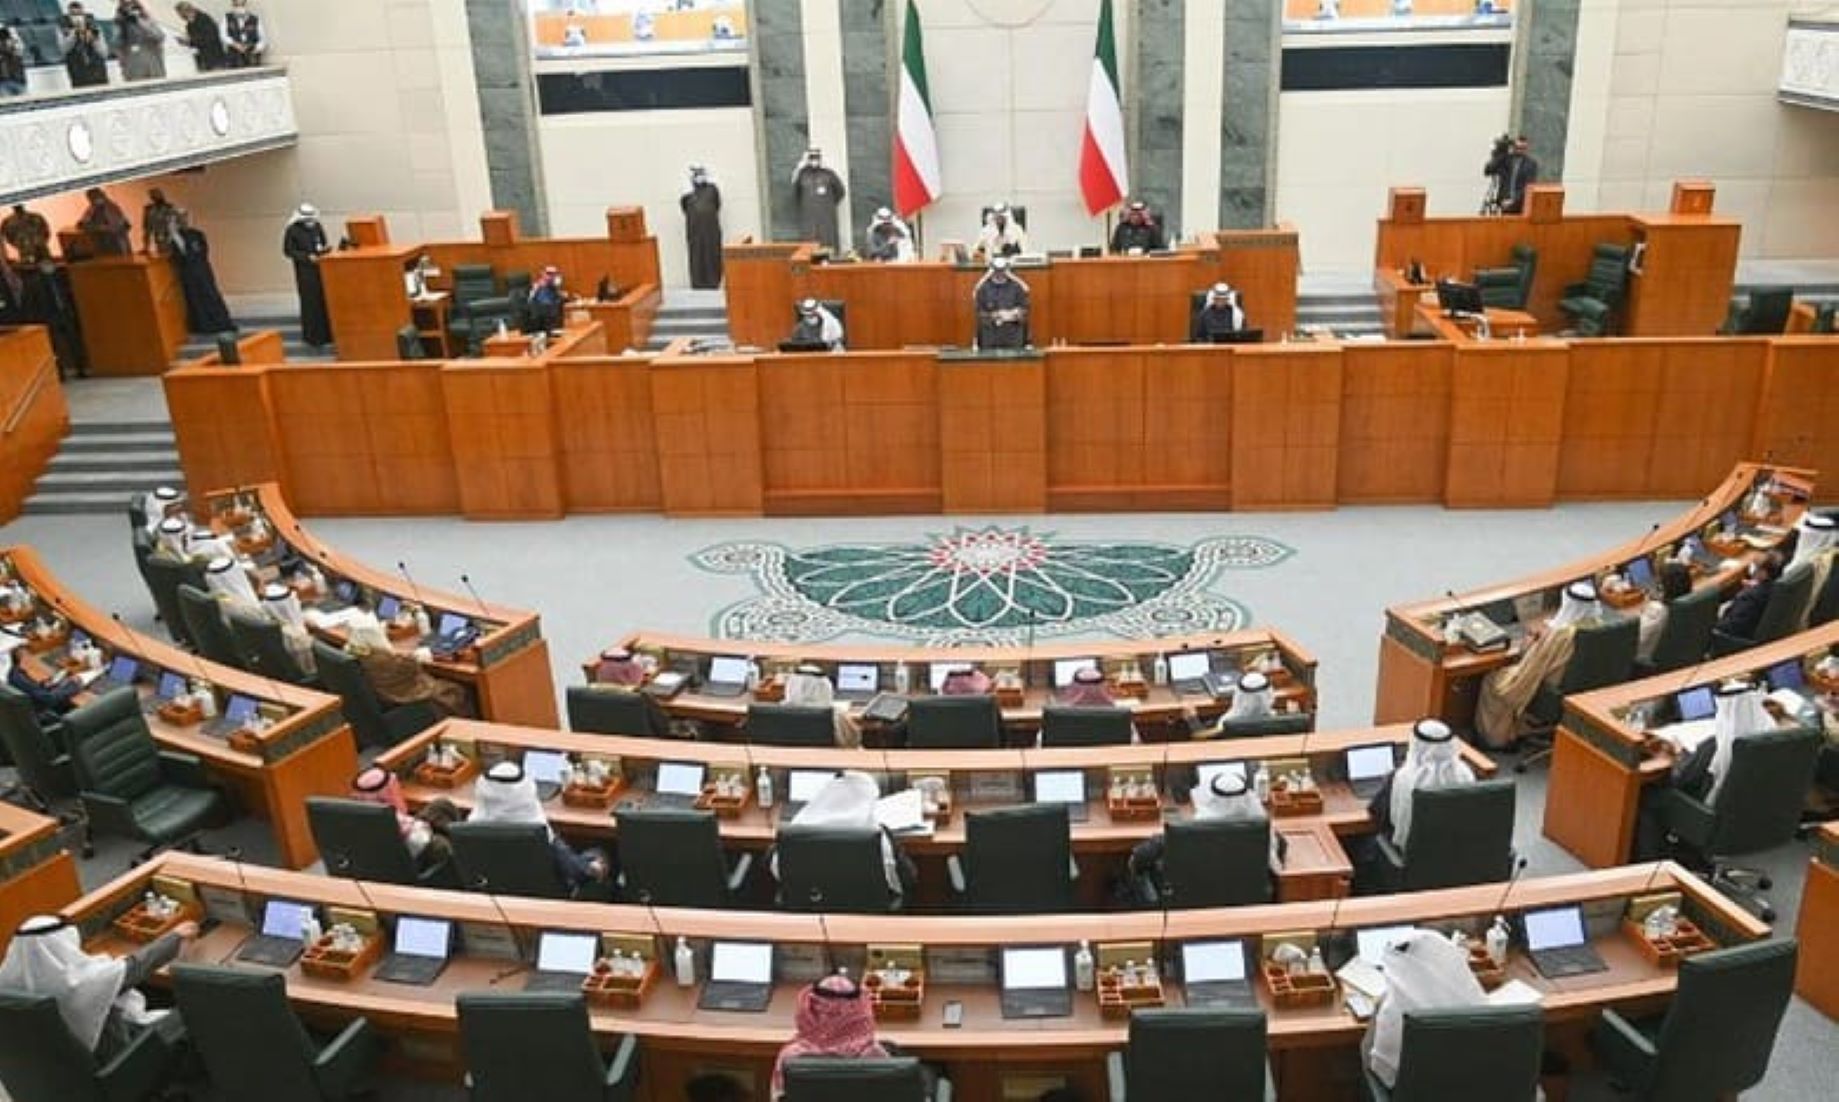 Kuwait’s Court Nullified 2022 Election Results, Reinstated Previous Parliament